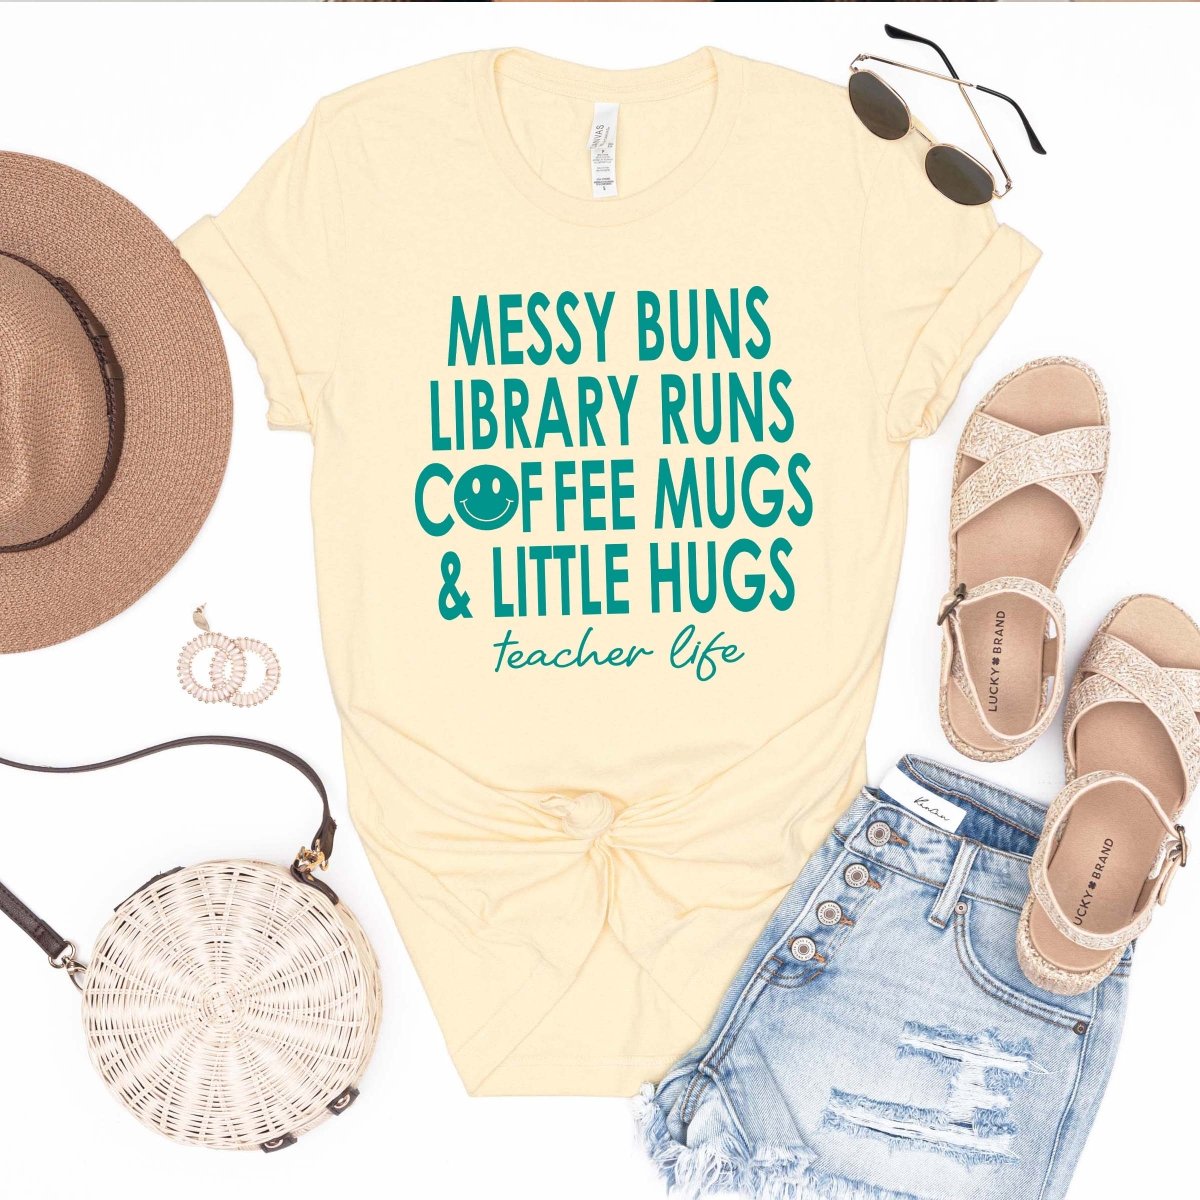 Messy Buns Library Runs Tee - Limeberry Designs